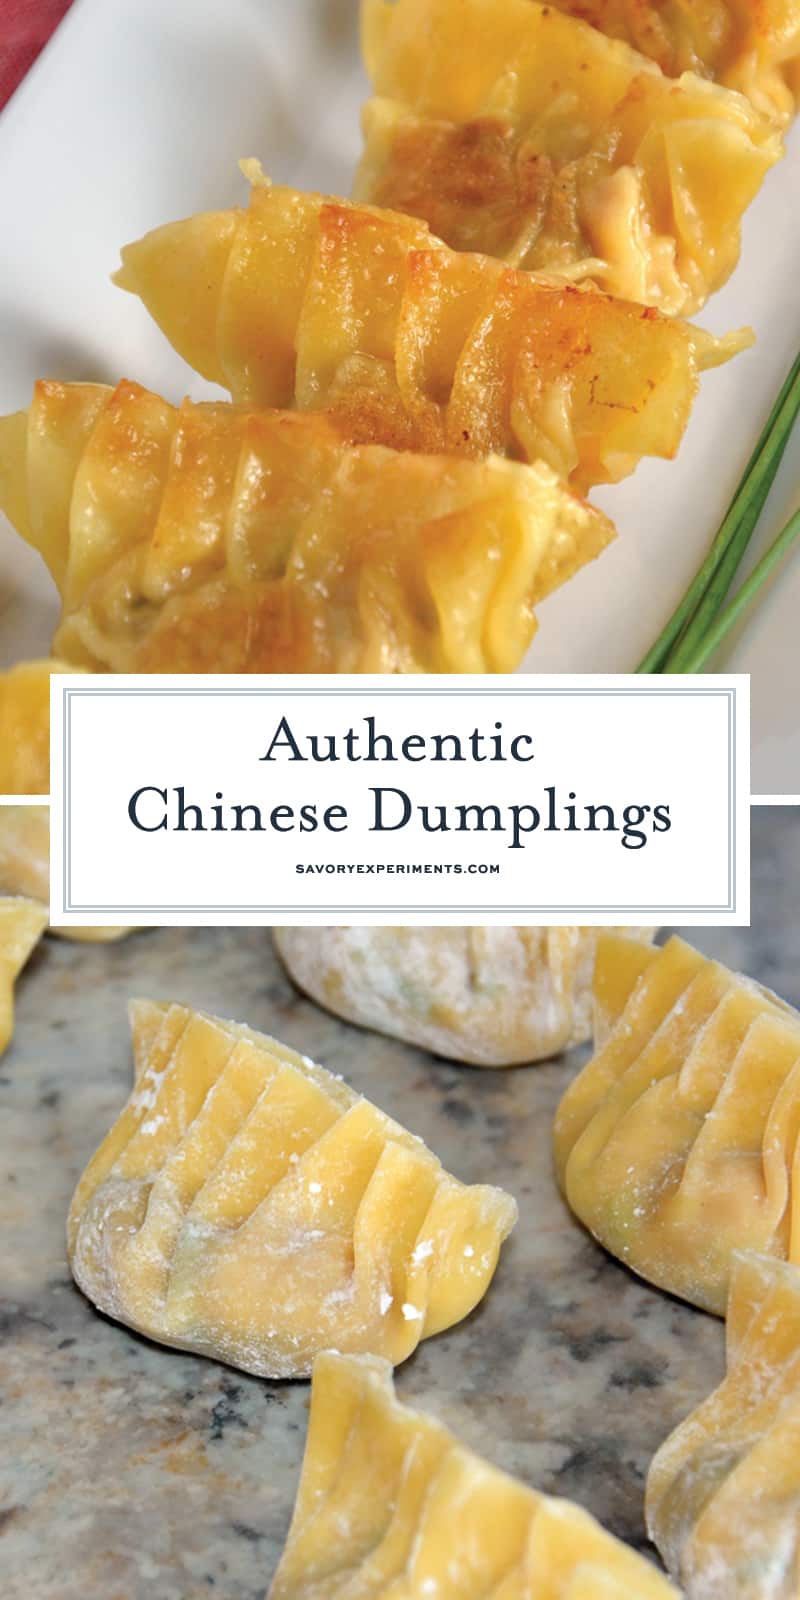 Authentic Chinese Dumplings - How to Make Chinese Dumplings